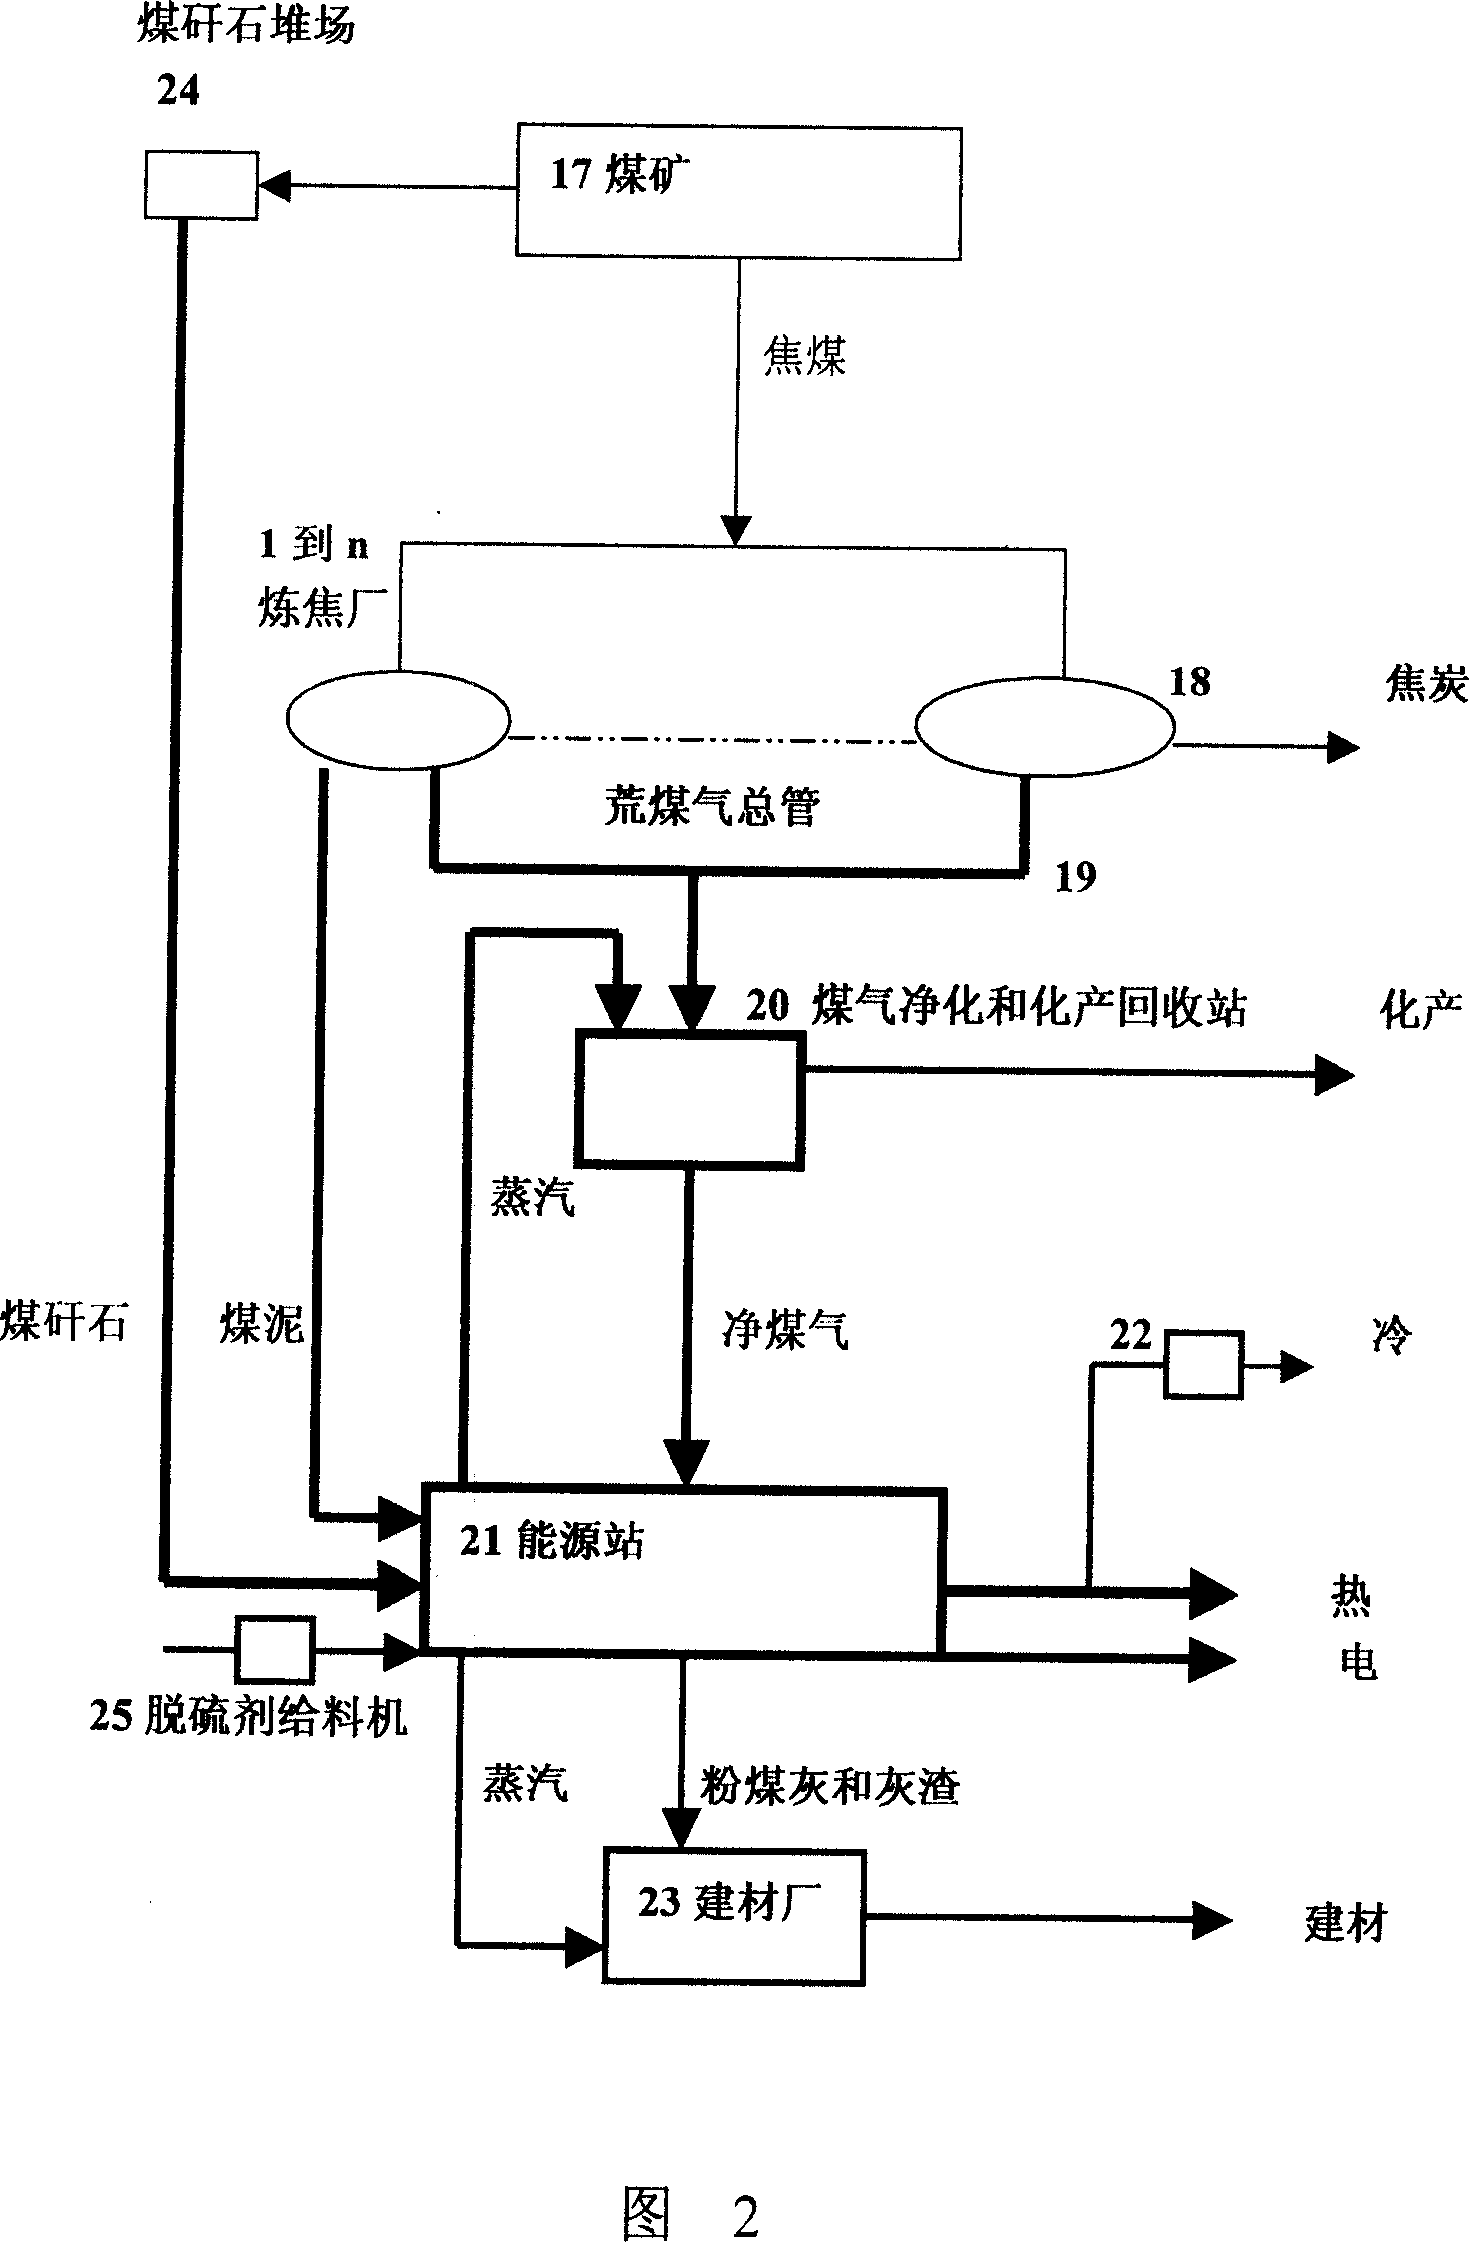 Double-fuel combustion-supporting type gas-steam combined cycle system